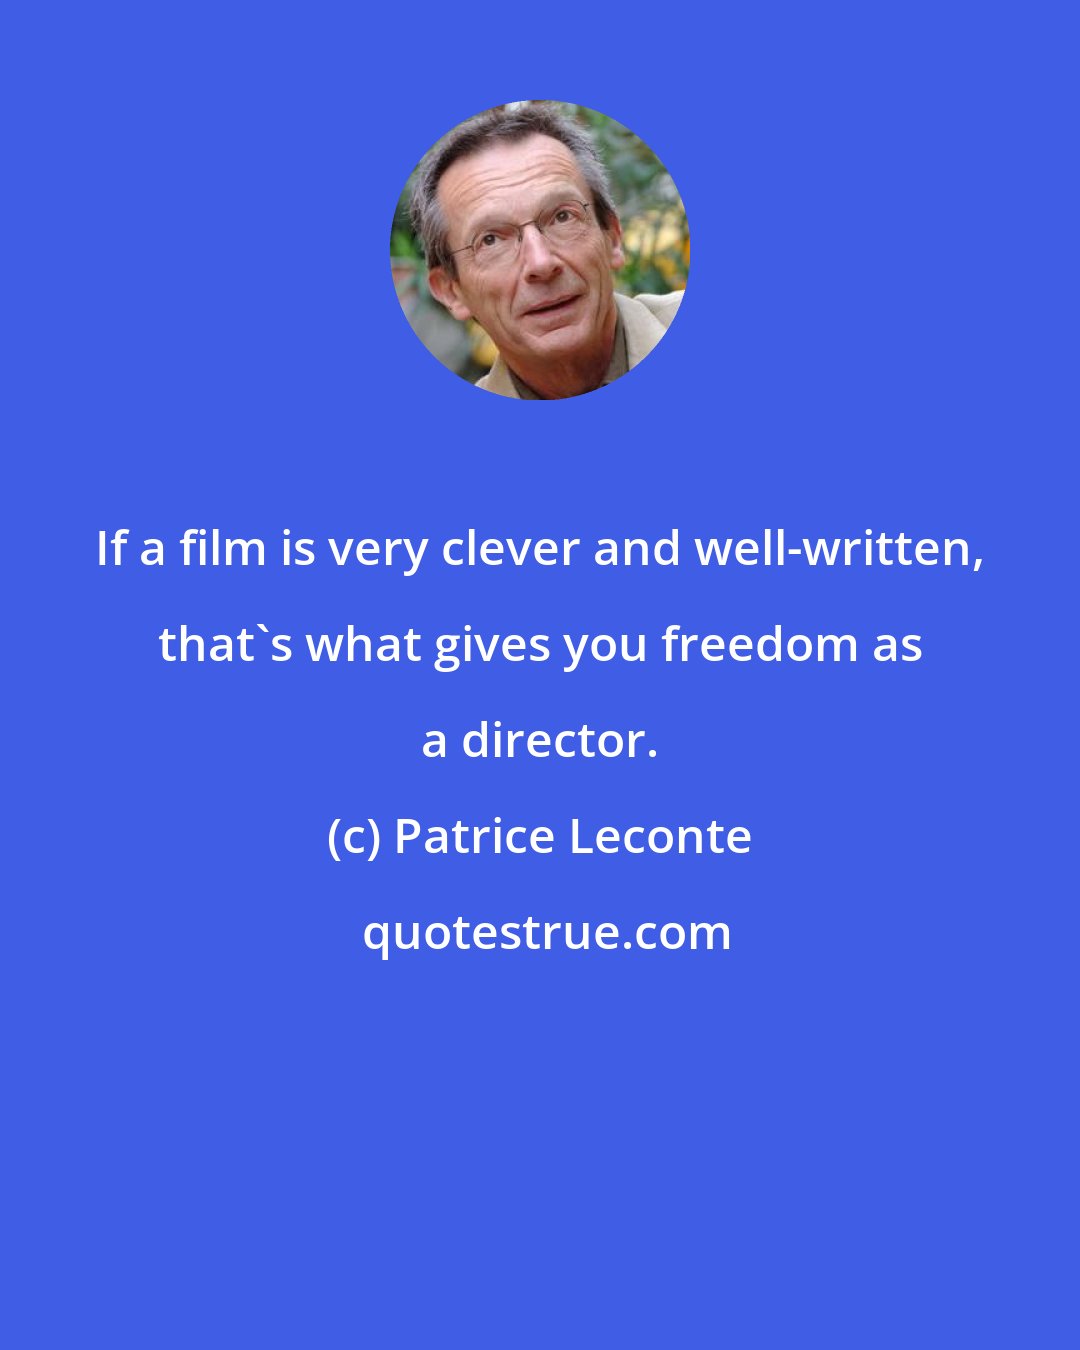 Patrice Leconte: If a film is very clever and well-written, that's what gives you freedom as a director.